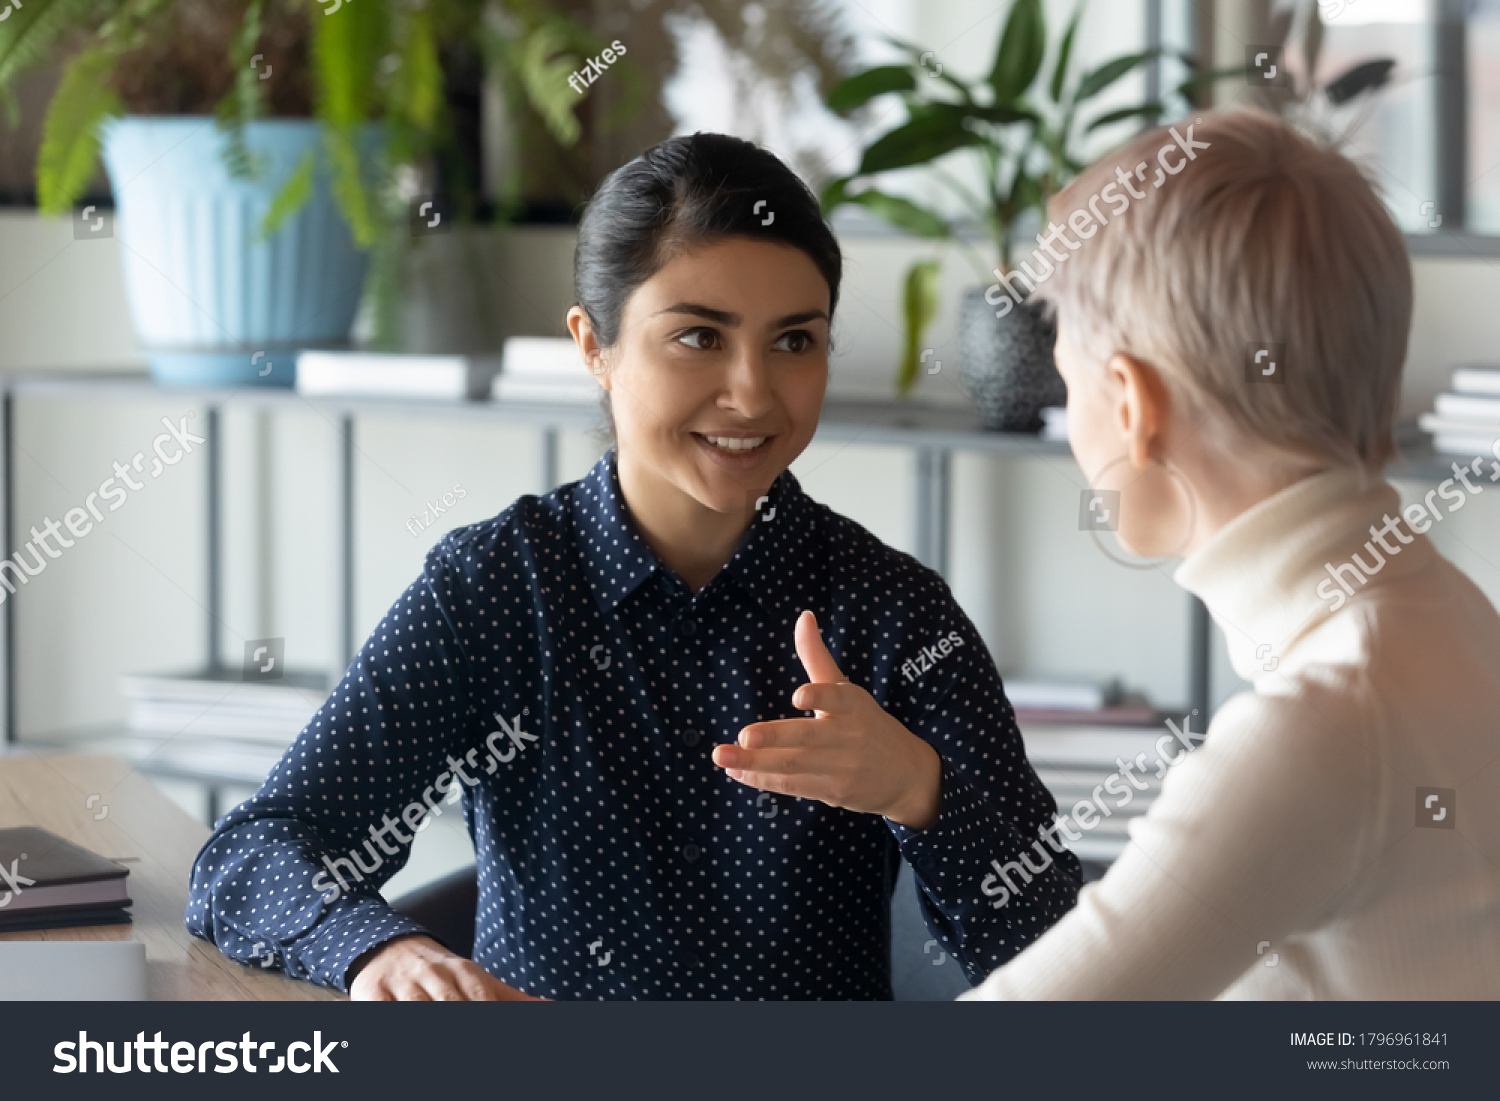 Friendly millennial indian businesswoman talking to blonde female colleague, sitting at table in office. Two young multiracial employees discussing working issues or enjoying informal conversation. #1796961841